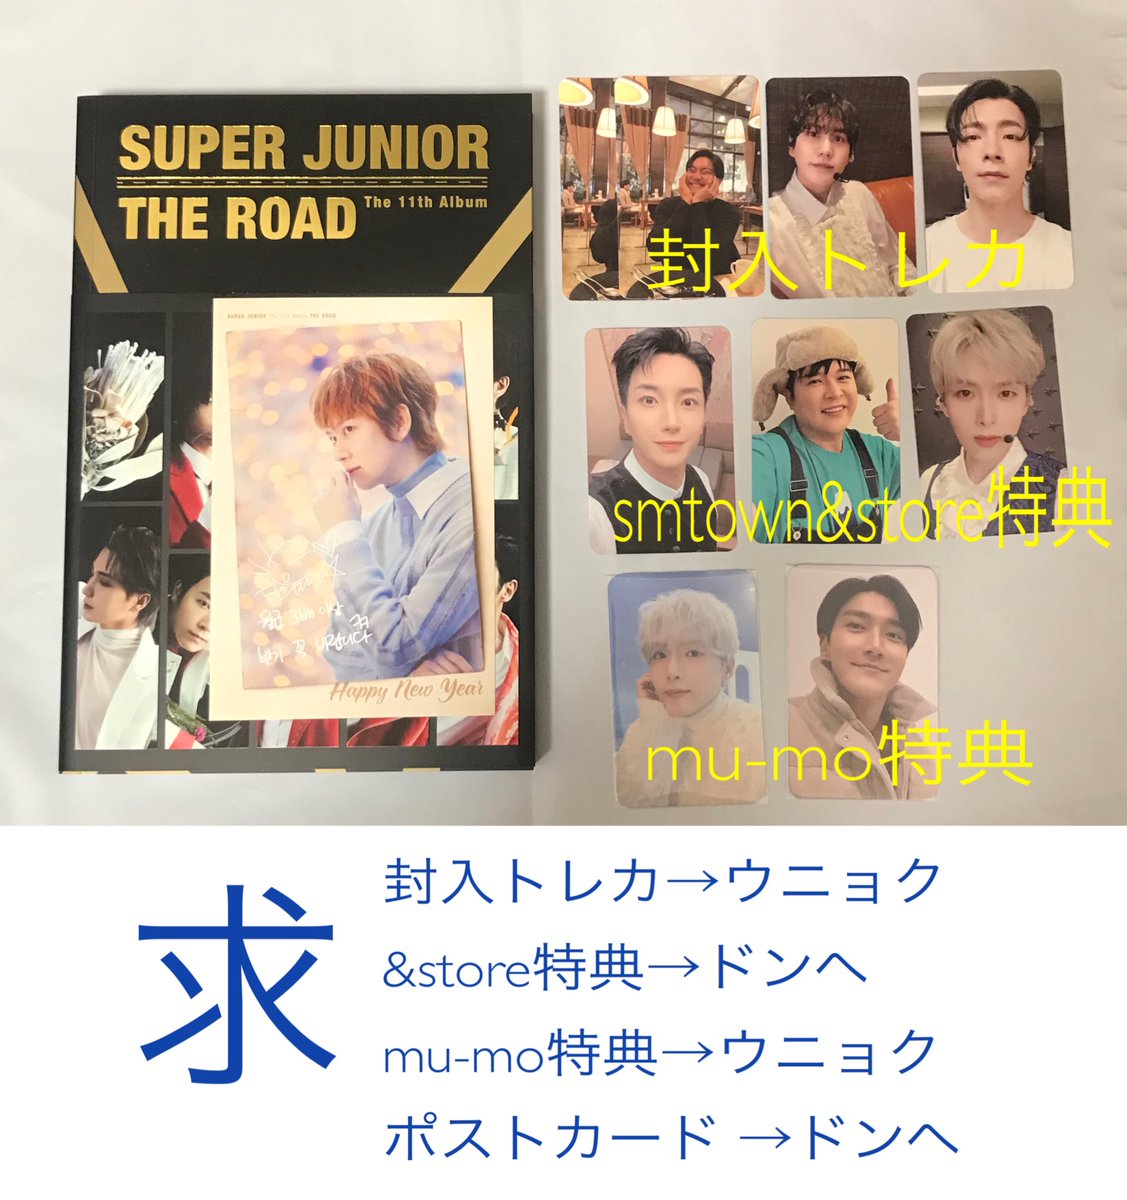 SUPER JUNIOR the road ラキドロ トレカ ドンへ | www.kinderpartys.at